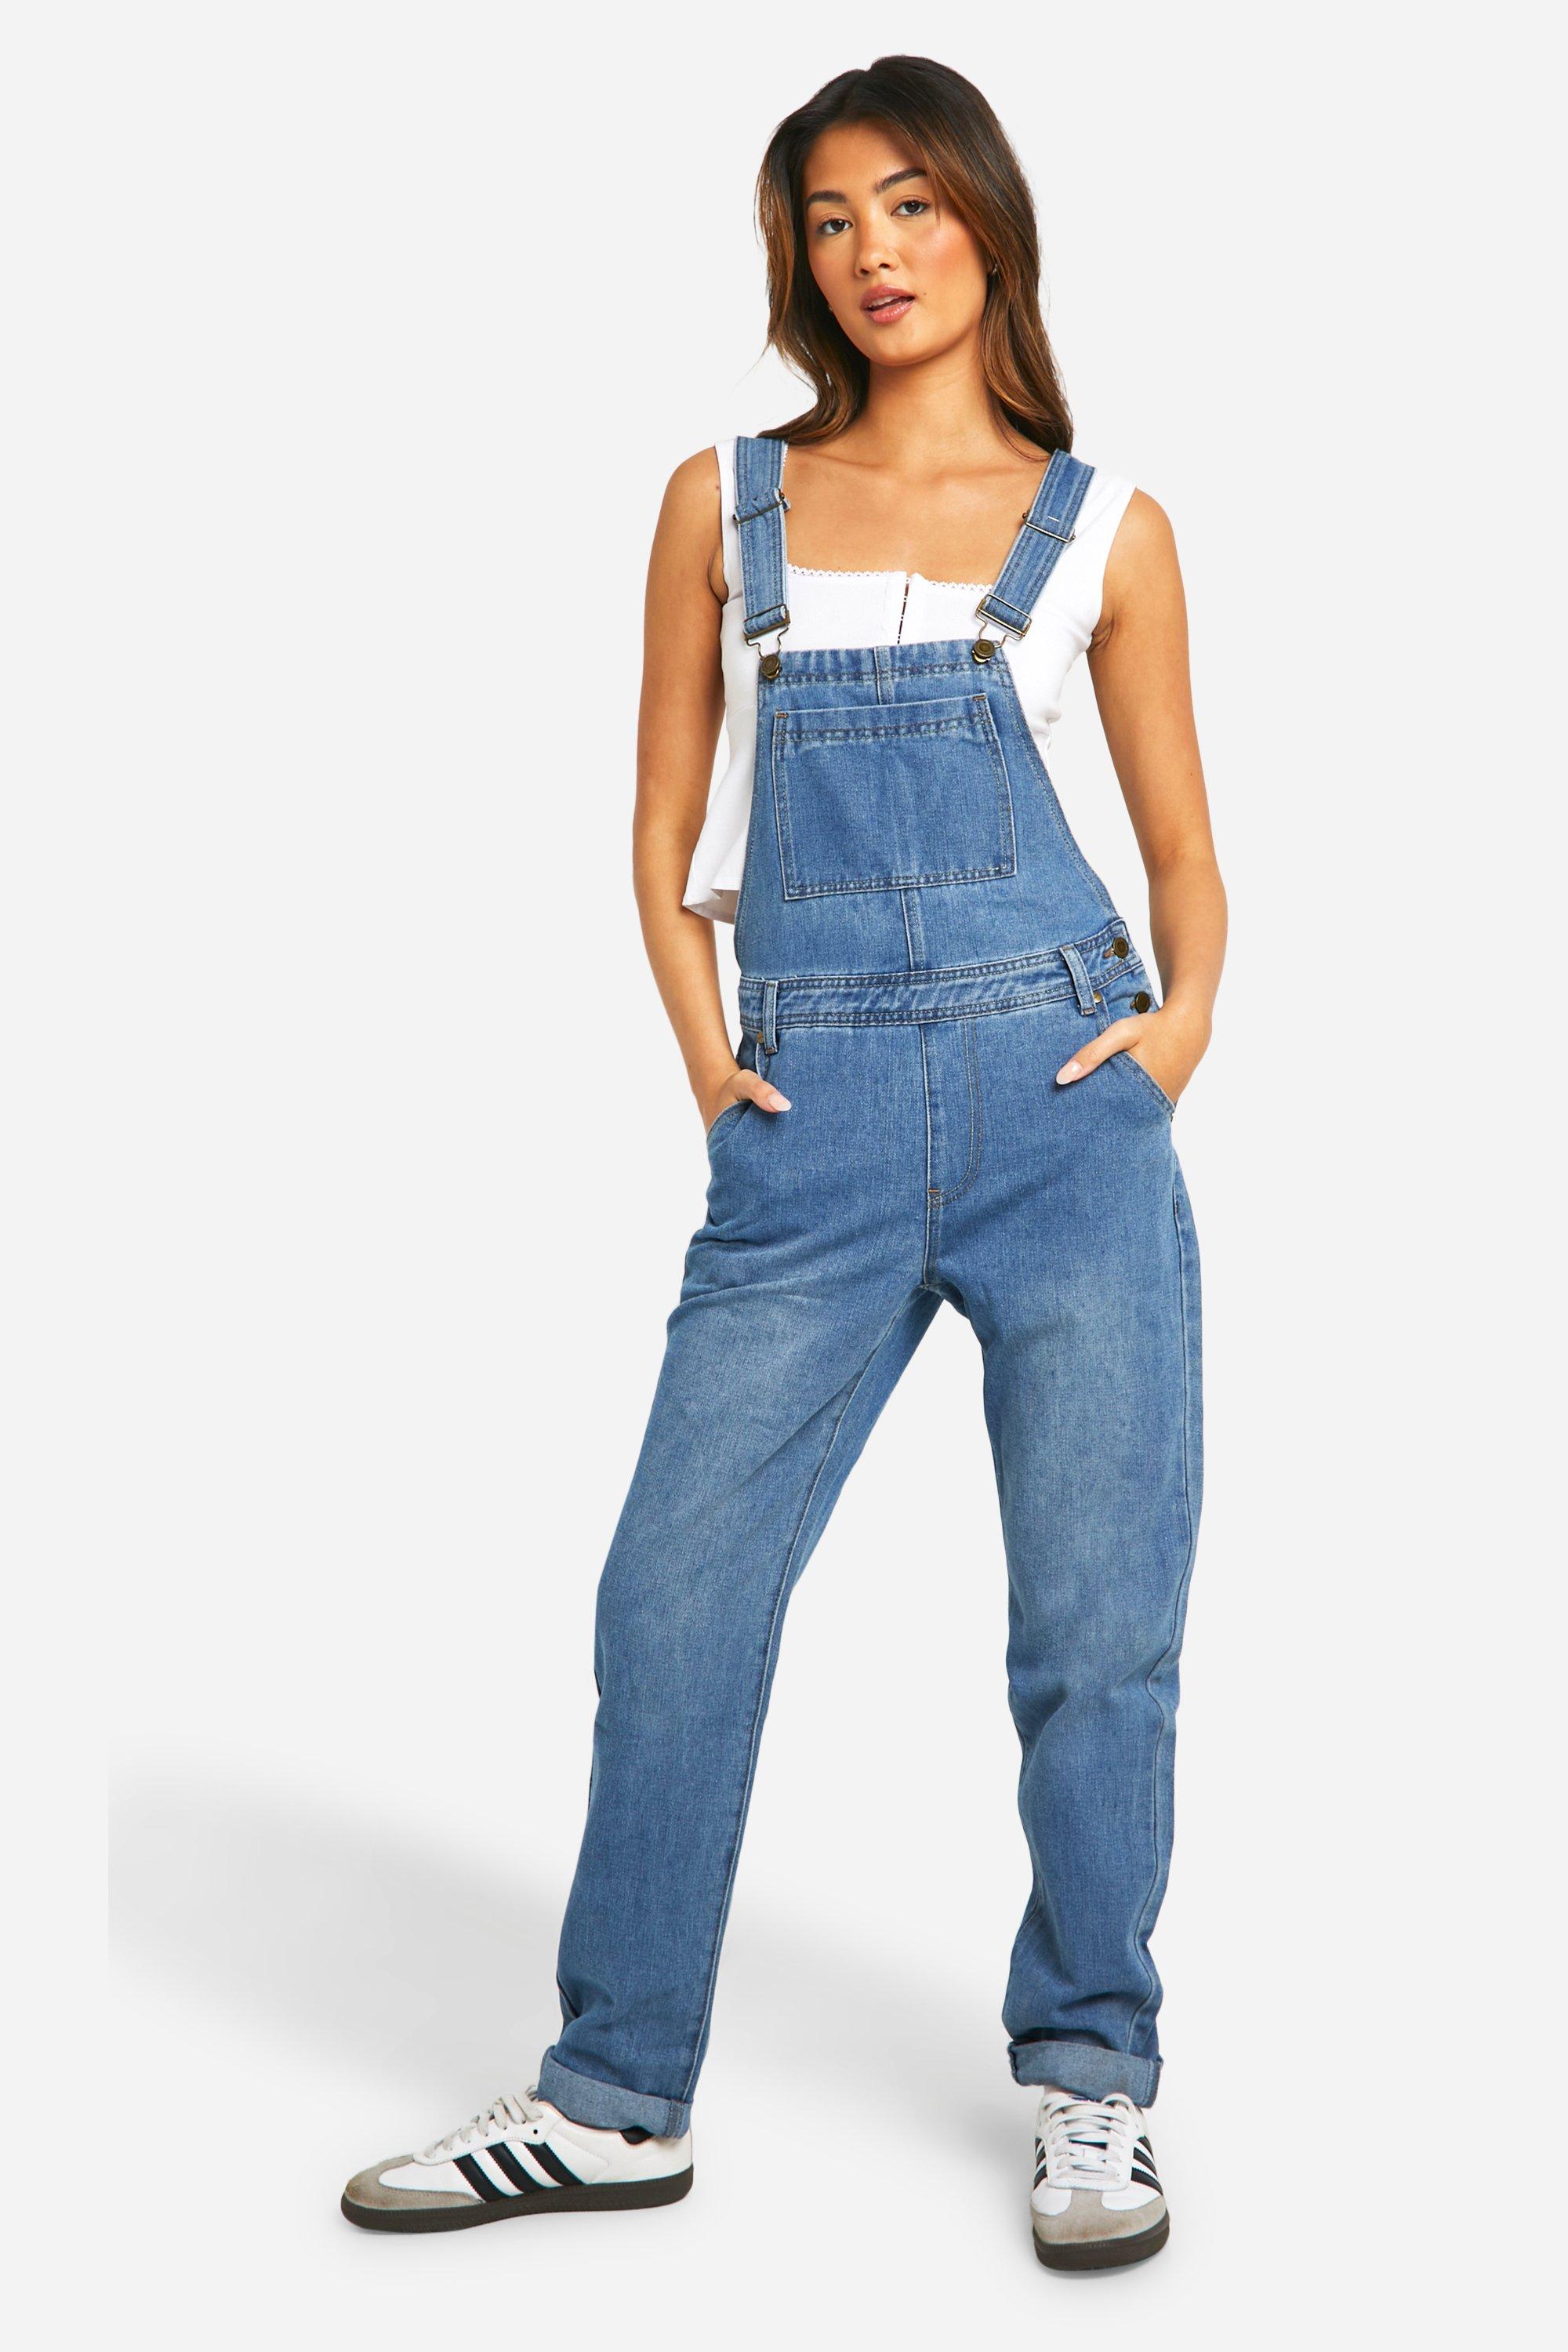 Smart Dungarees Womens Cheapest Dealers